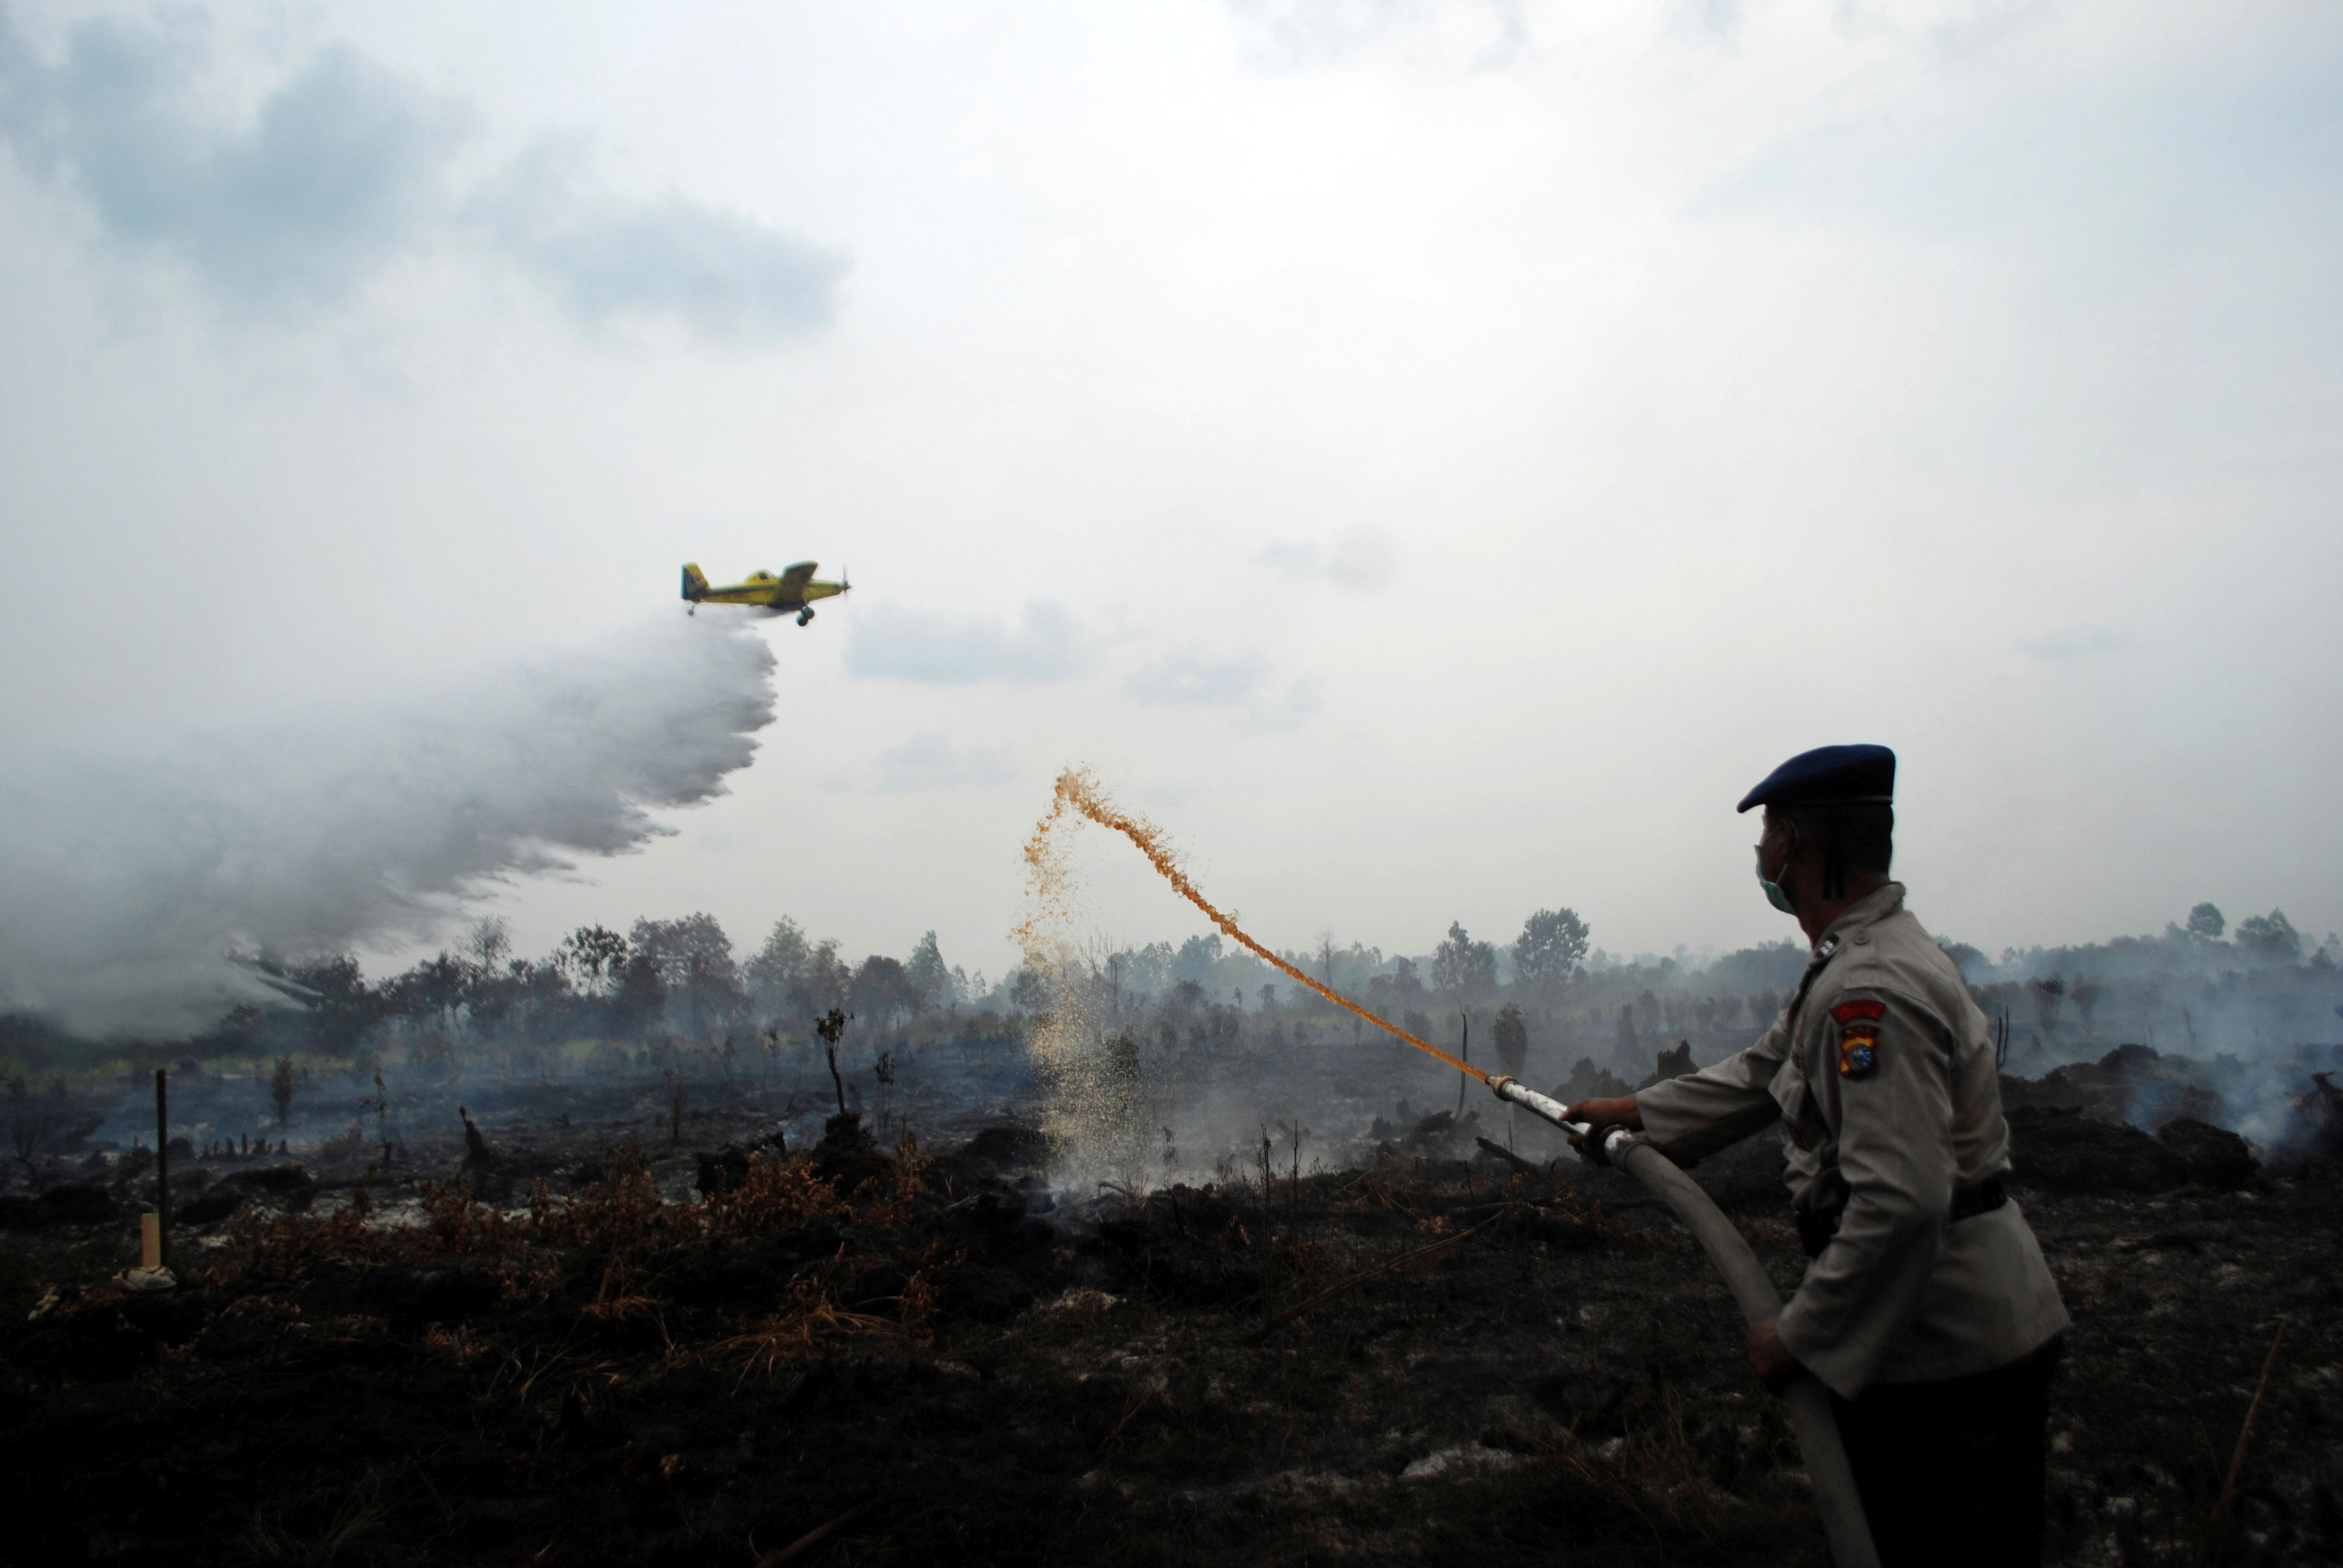 A water bomber drops its payload as a police officer tries to extinguish a peat fire in Kampar, Riau province, Sumatra, Indonesia August 29, 2016 in this photo taken by Antara Foto. Antara Foto/Rony Muharrman/via REUTERS ATTENTION EDITORS - THIS IMAGE WAS